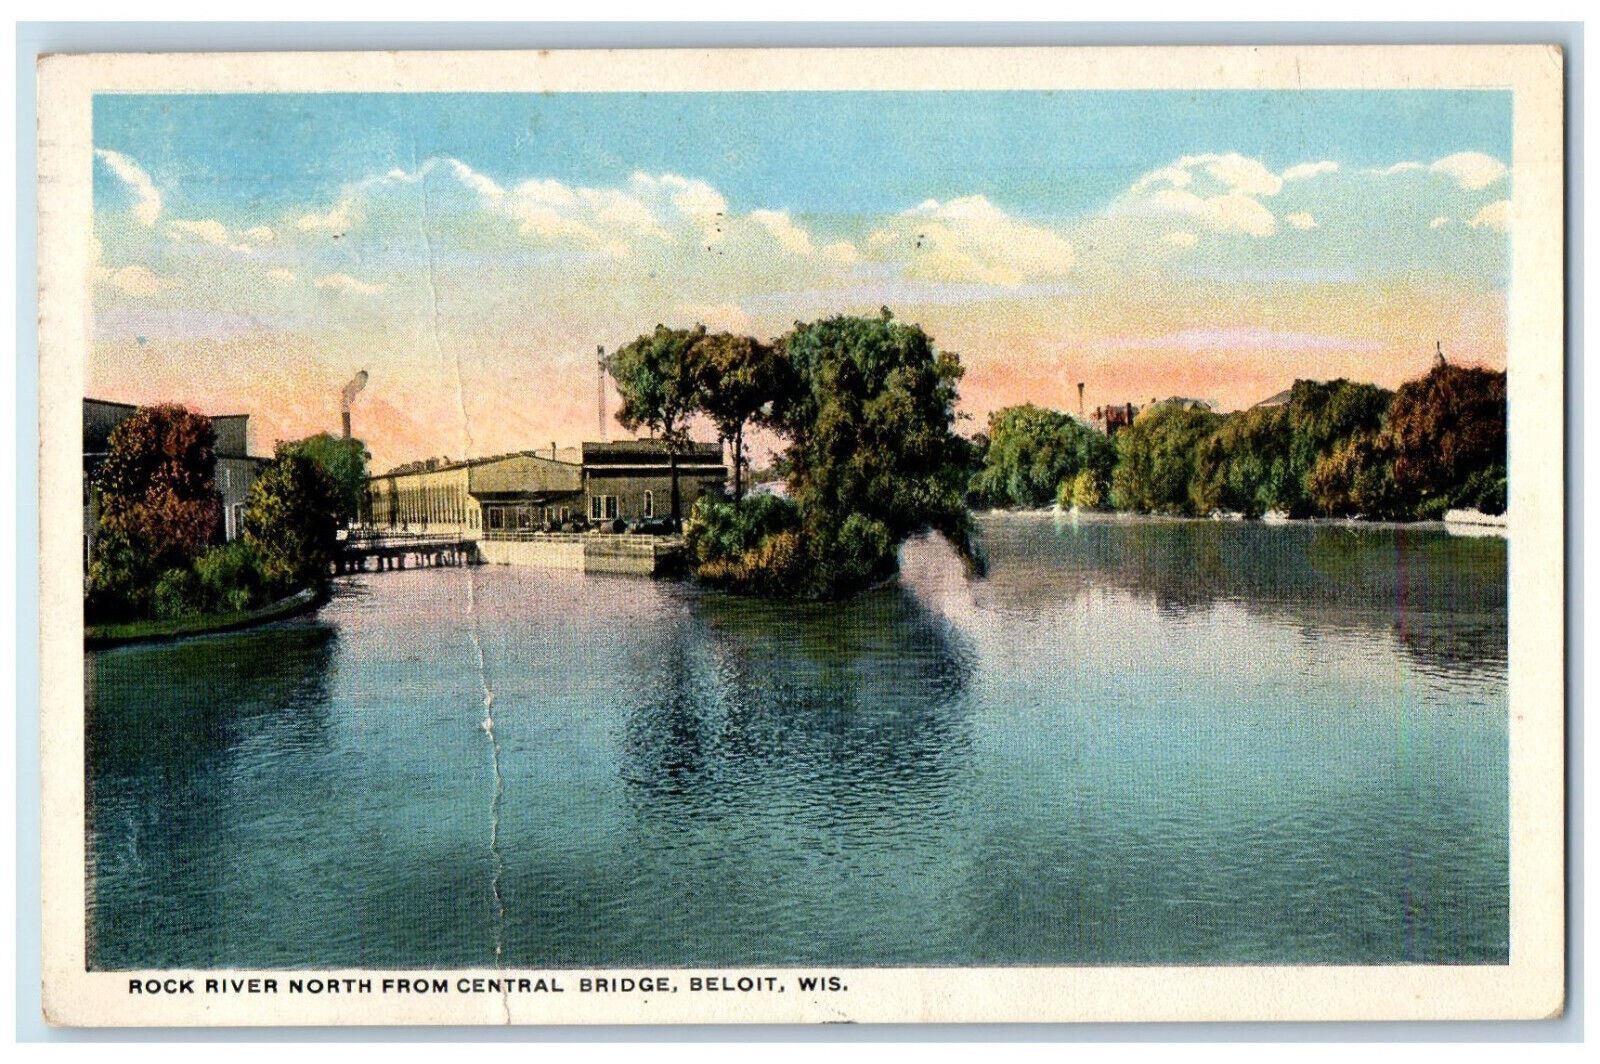 1916 Rock River North from Central Bridge Beloit Wisconsin WI Posted Postcard